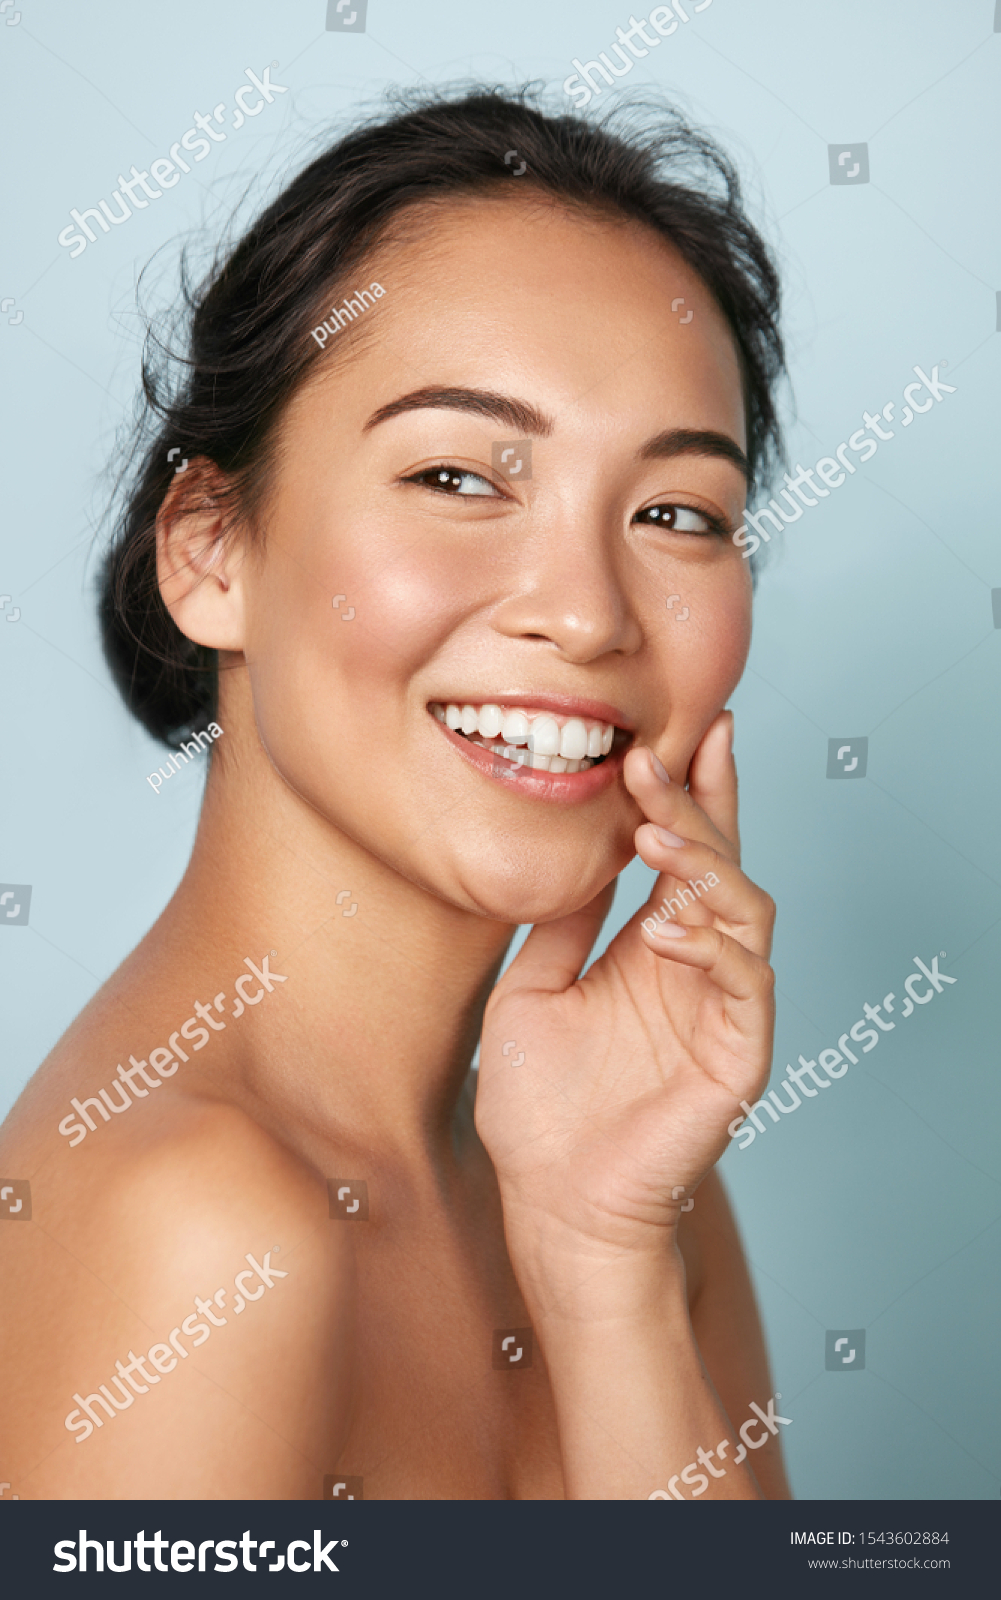 Beauty face. Smiling asian woman touching healthy skin portrait. Beautiful happy girl model with fresh glowing hydrated facial skin and natural makeup on blue background at studio. Skin care concept #1543602884